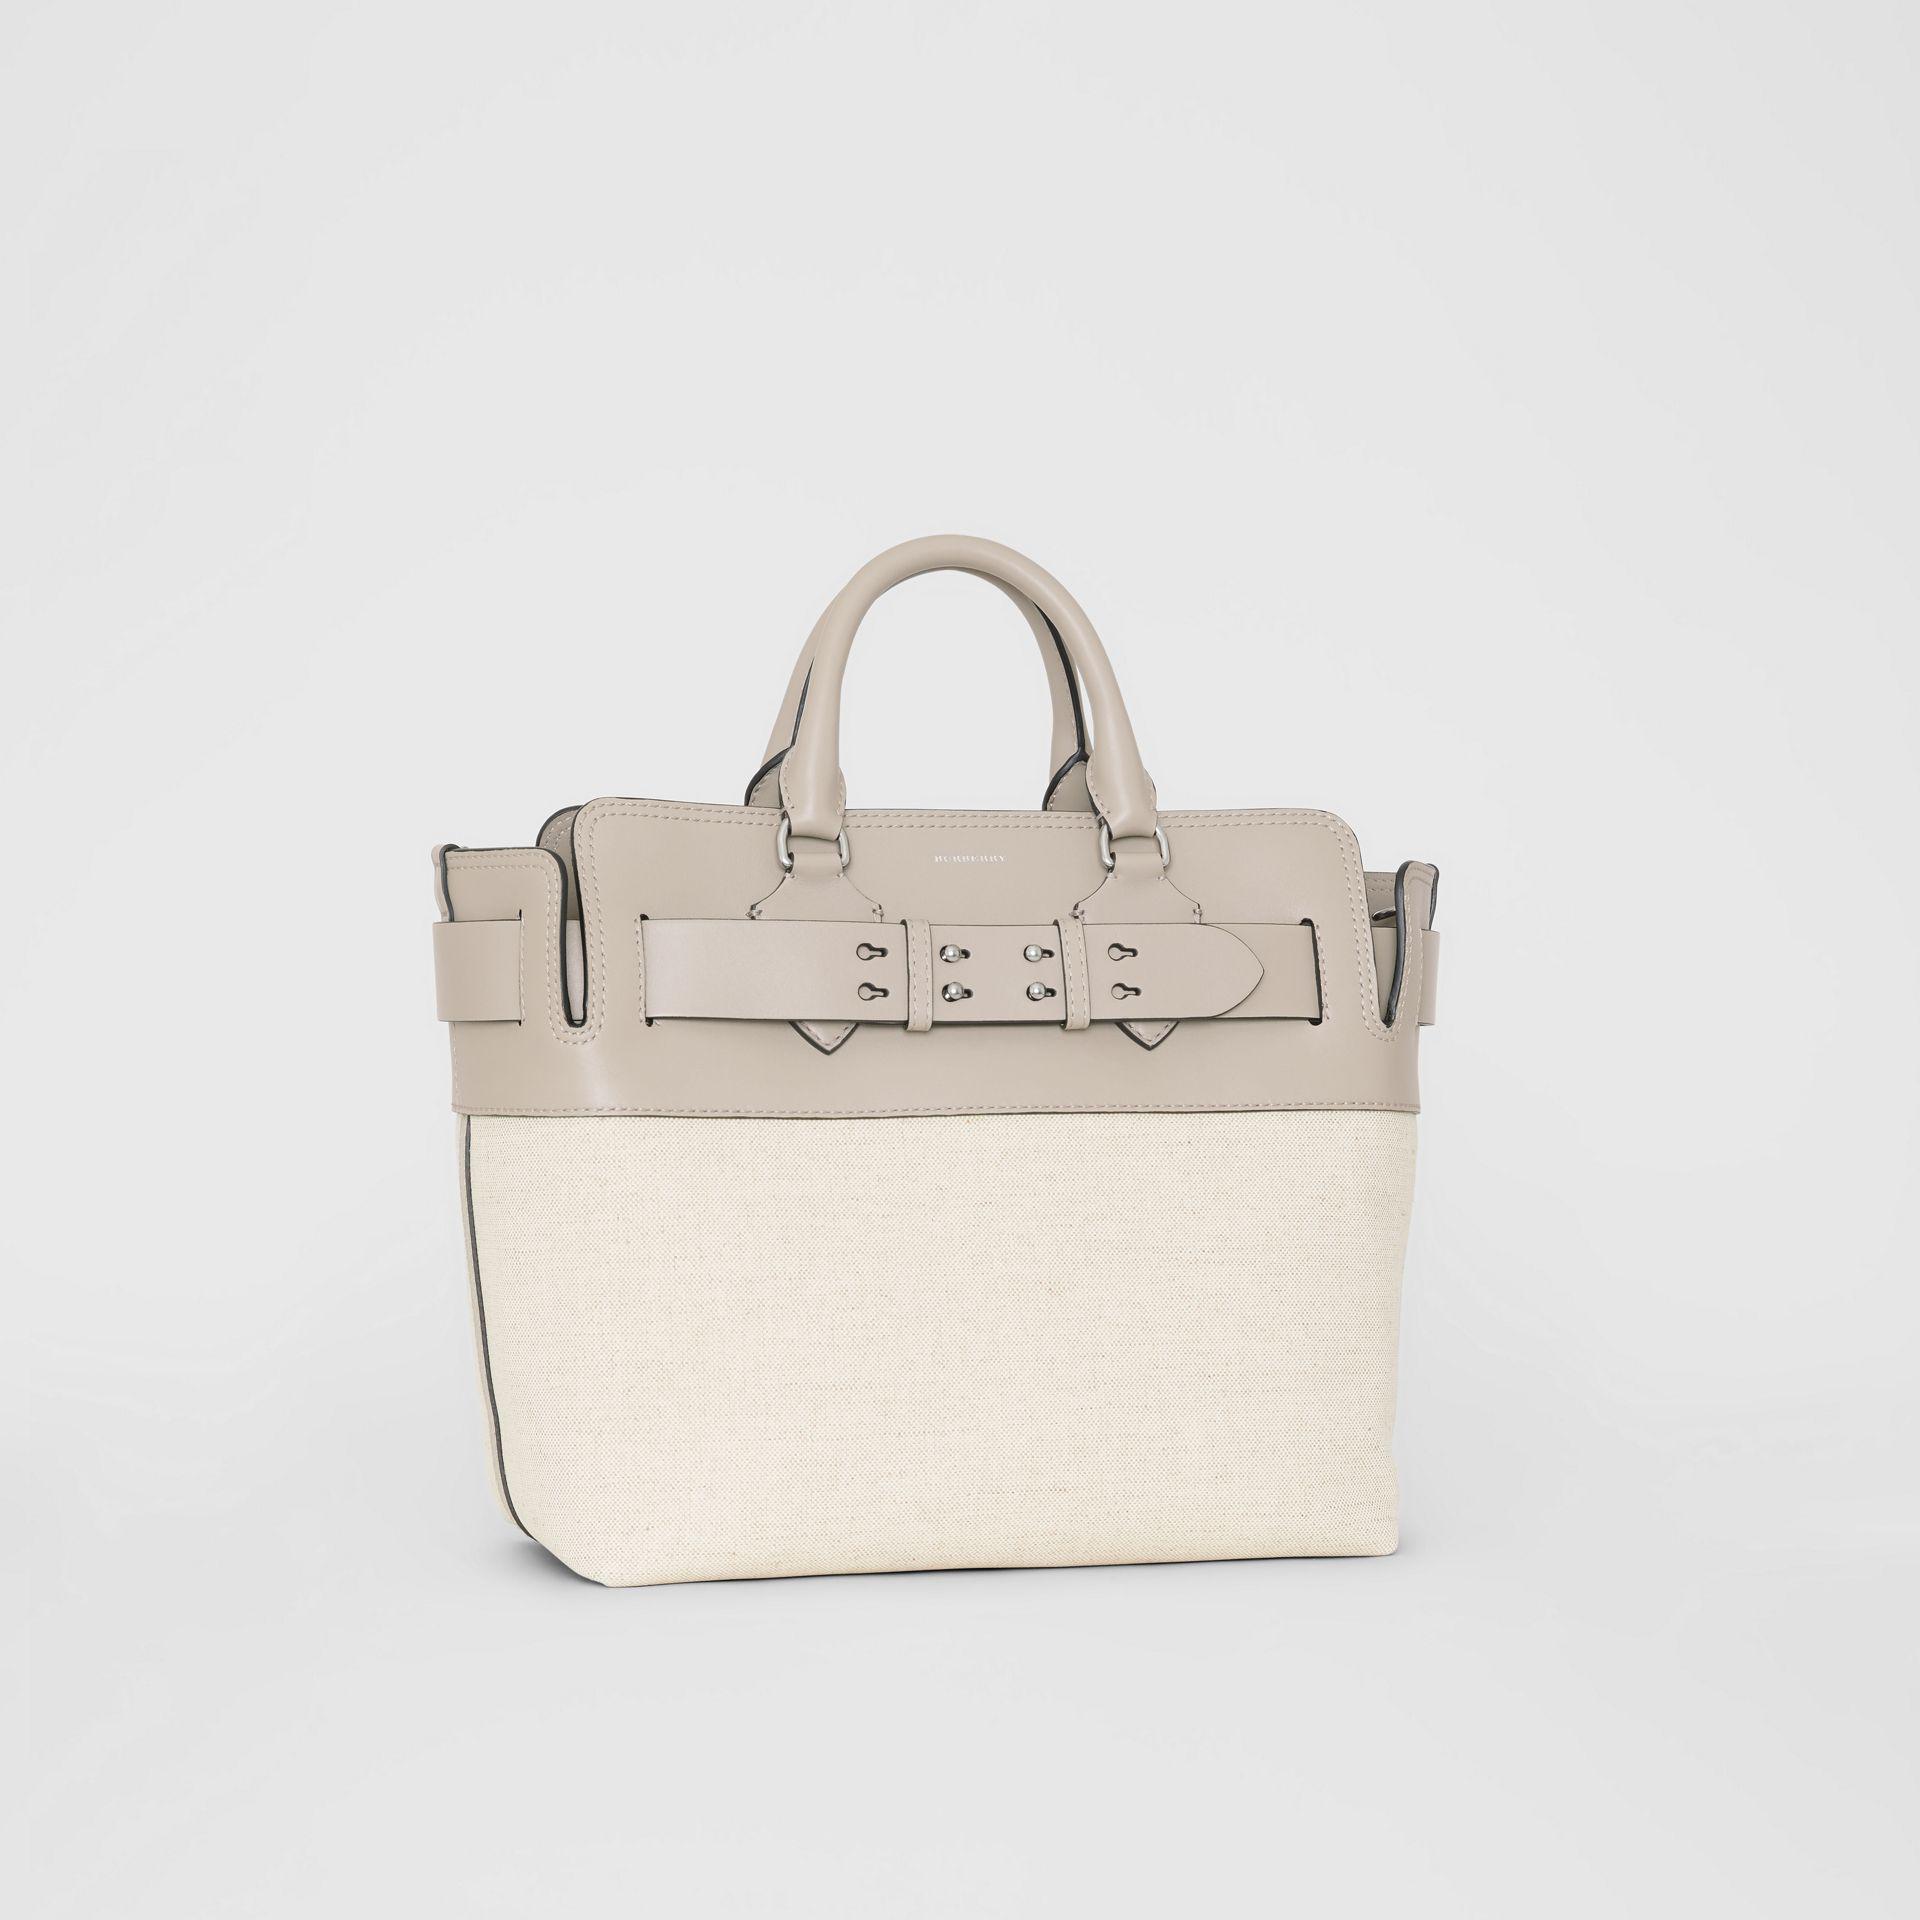 Burberry The Medium Canvas And Leather Belt Bag in Grey/Stone 